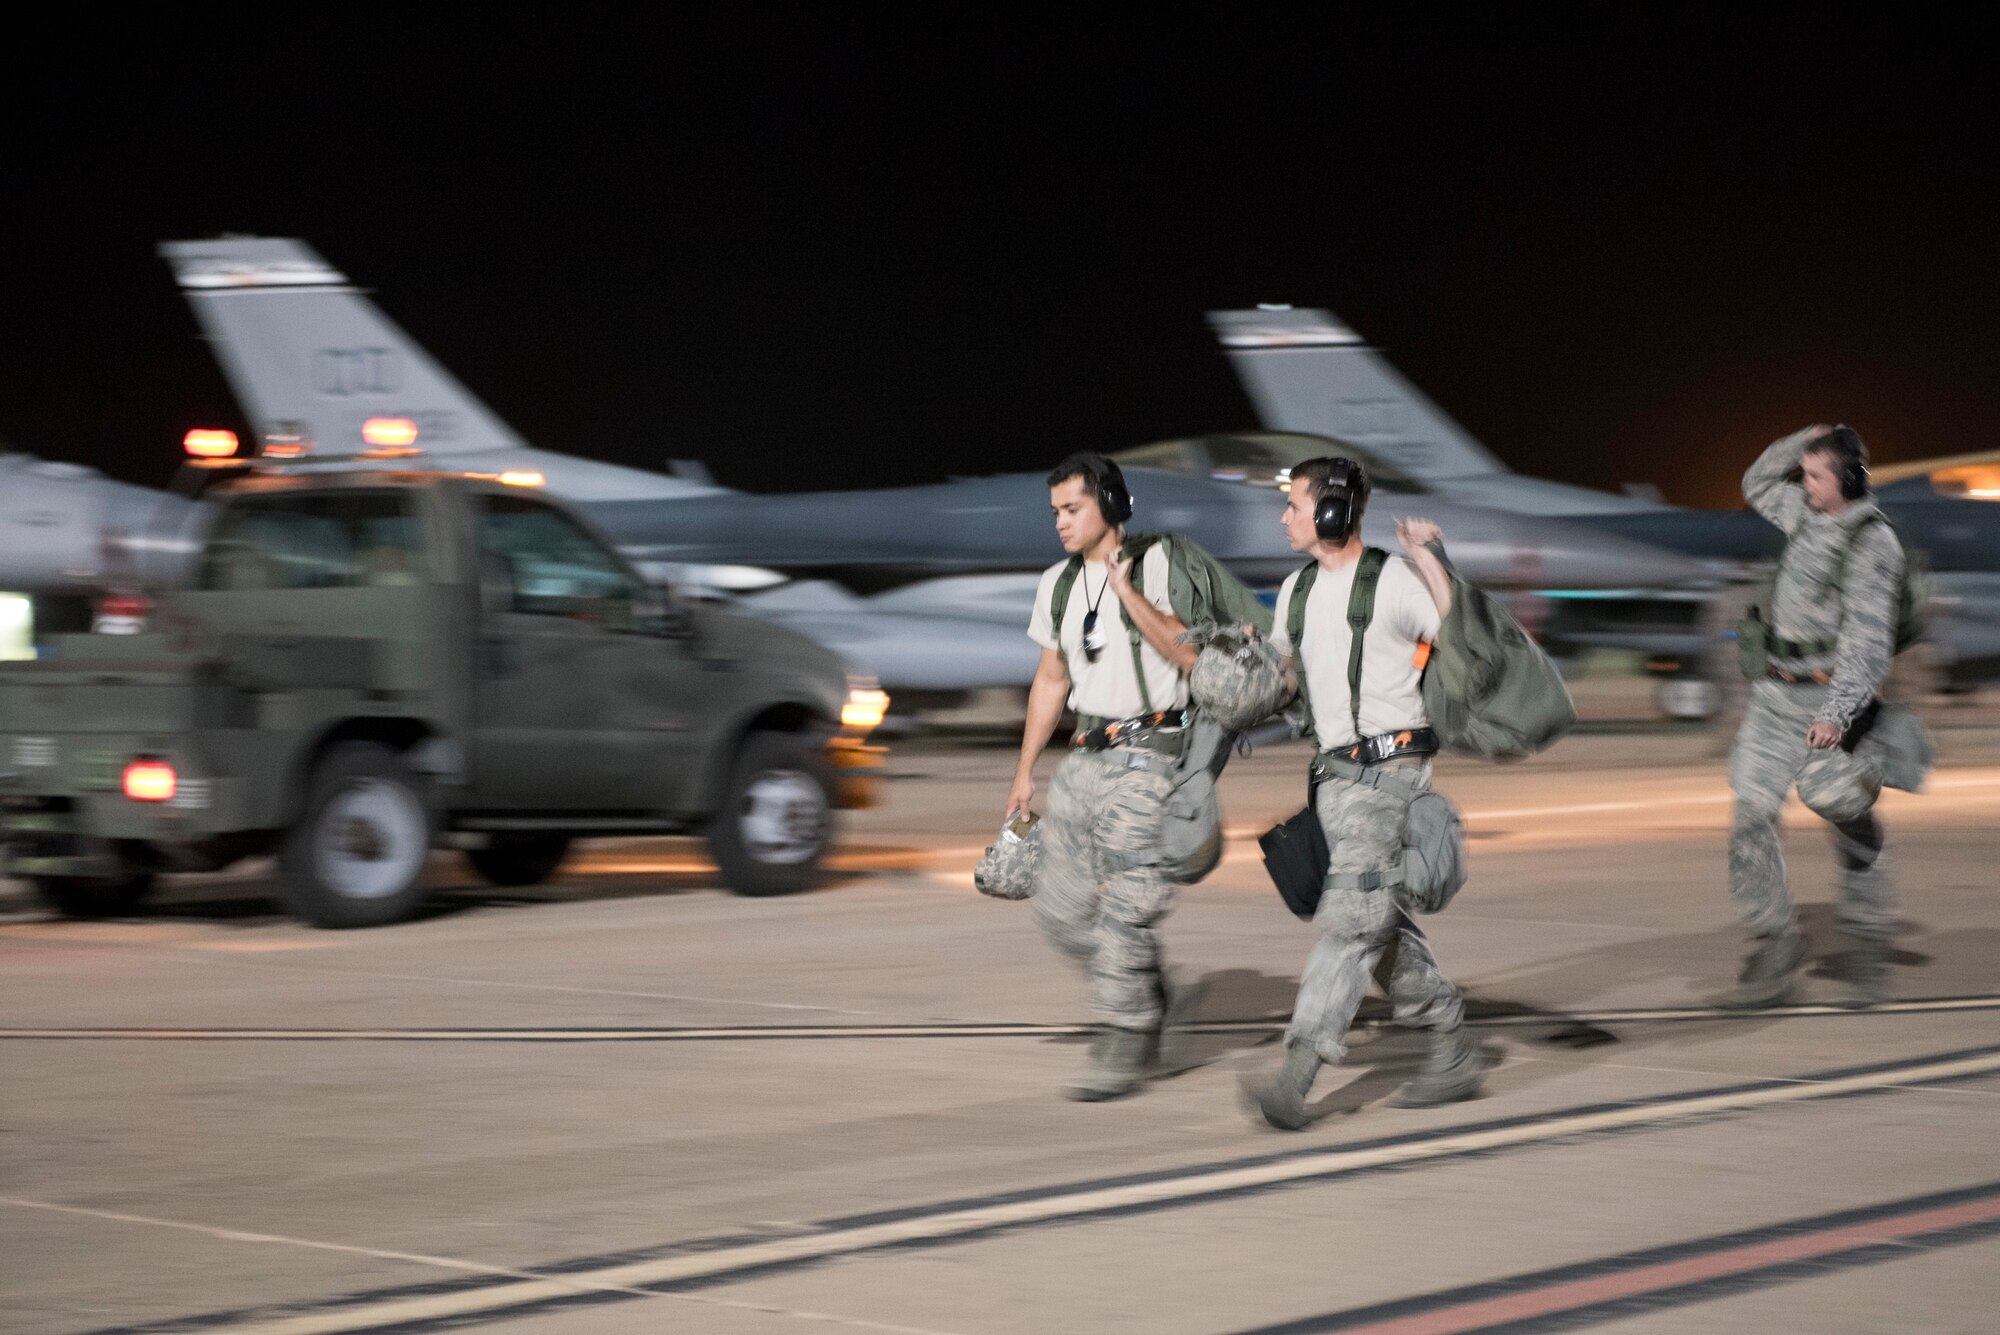 U.S. Airmen from the 140th Maintenance Squadron, Colorado Air National Guard, exit the flight line after loading bombs onto F-16's during a Wing Wartime Readiness Inspection, Buckley Air Force Base, Colo., Oct. 16, 2015. The WWRI is a four-day inspection that tests and evaluates the 140th Wing on critical requirements to ensure mission readiness for real world deployments. (U.S. Air National Guard photo by Senior Airman Michelle Y. Alvarez-Rea)
